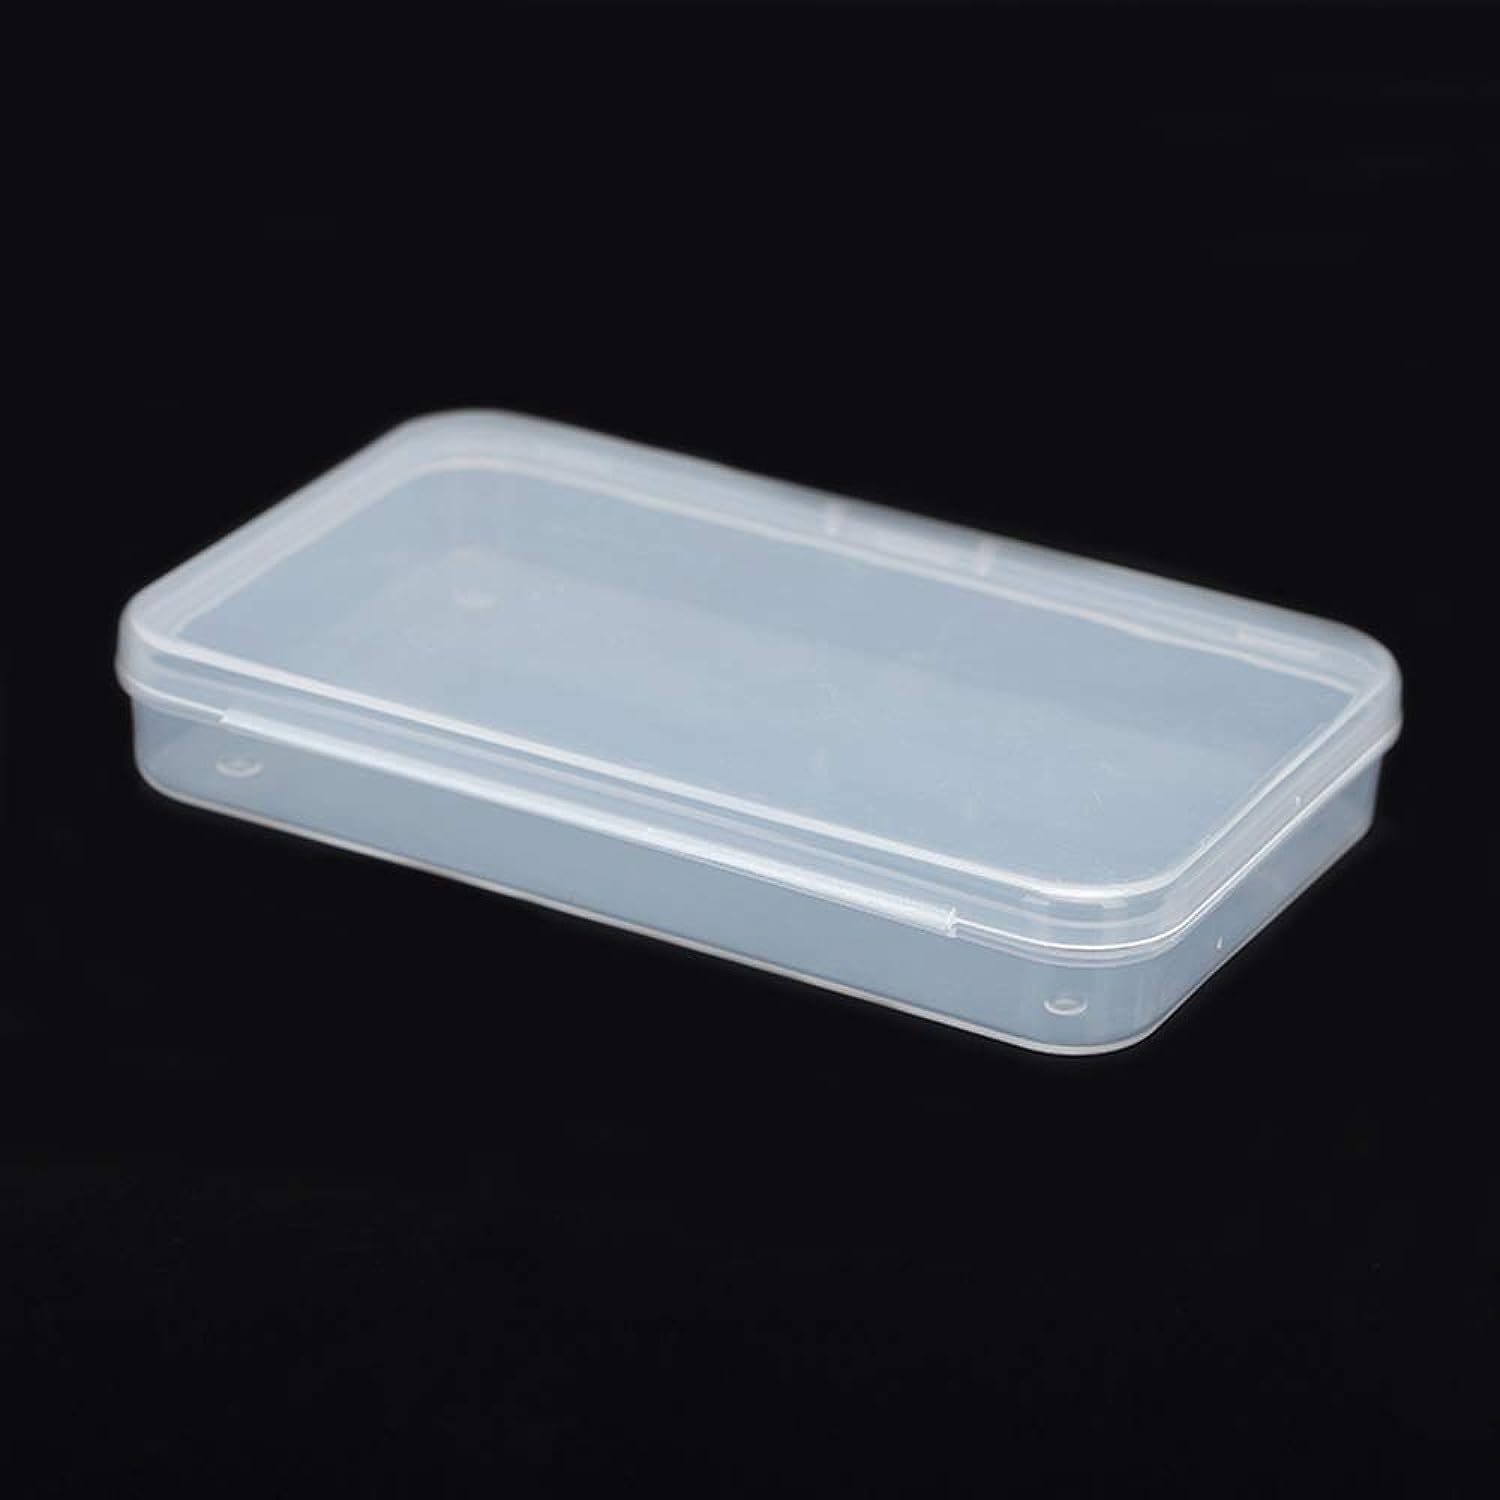 2 Pack 24 Grids Clear Plastic Organizer Box, Storage Container